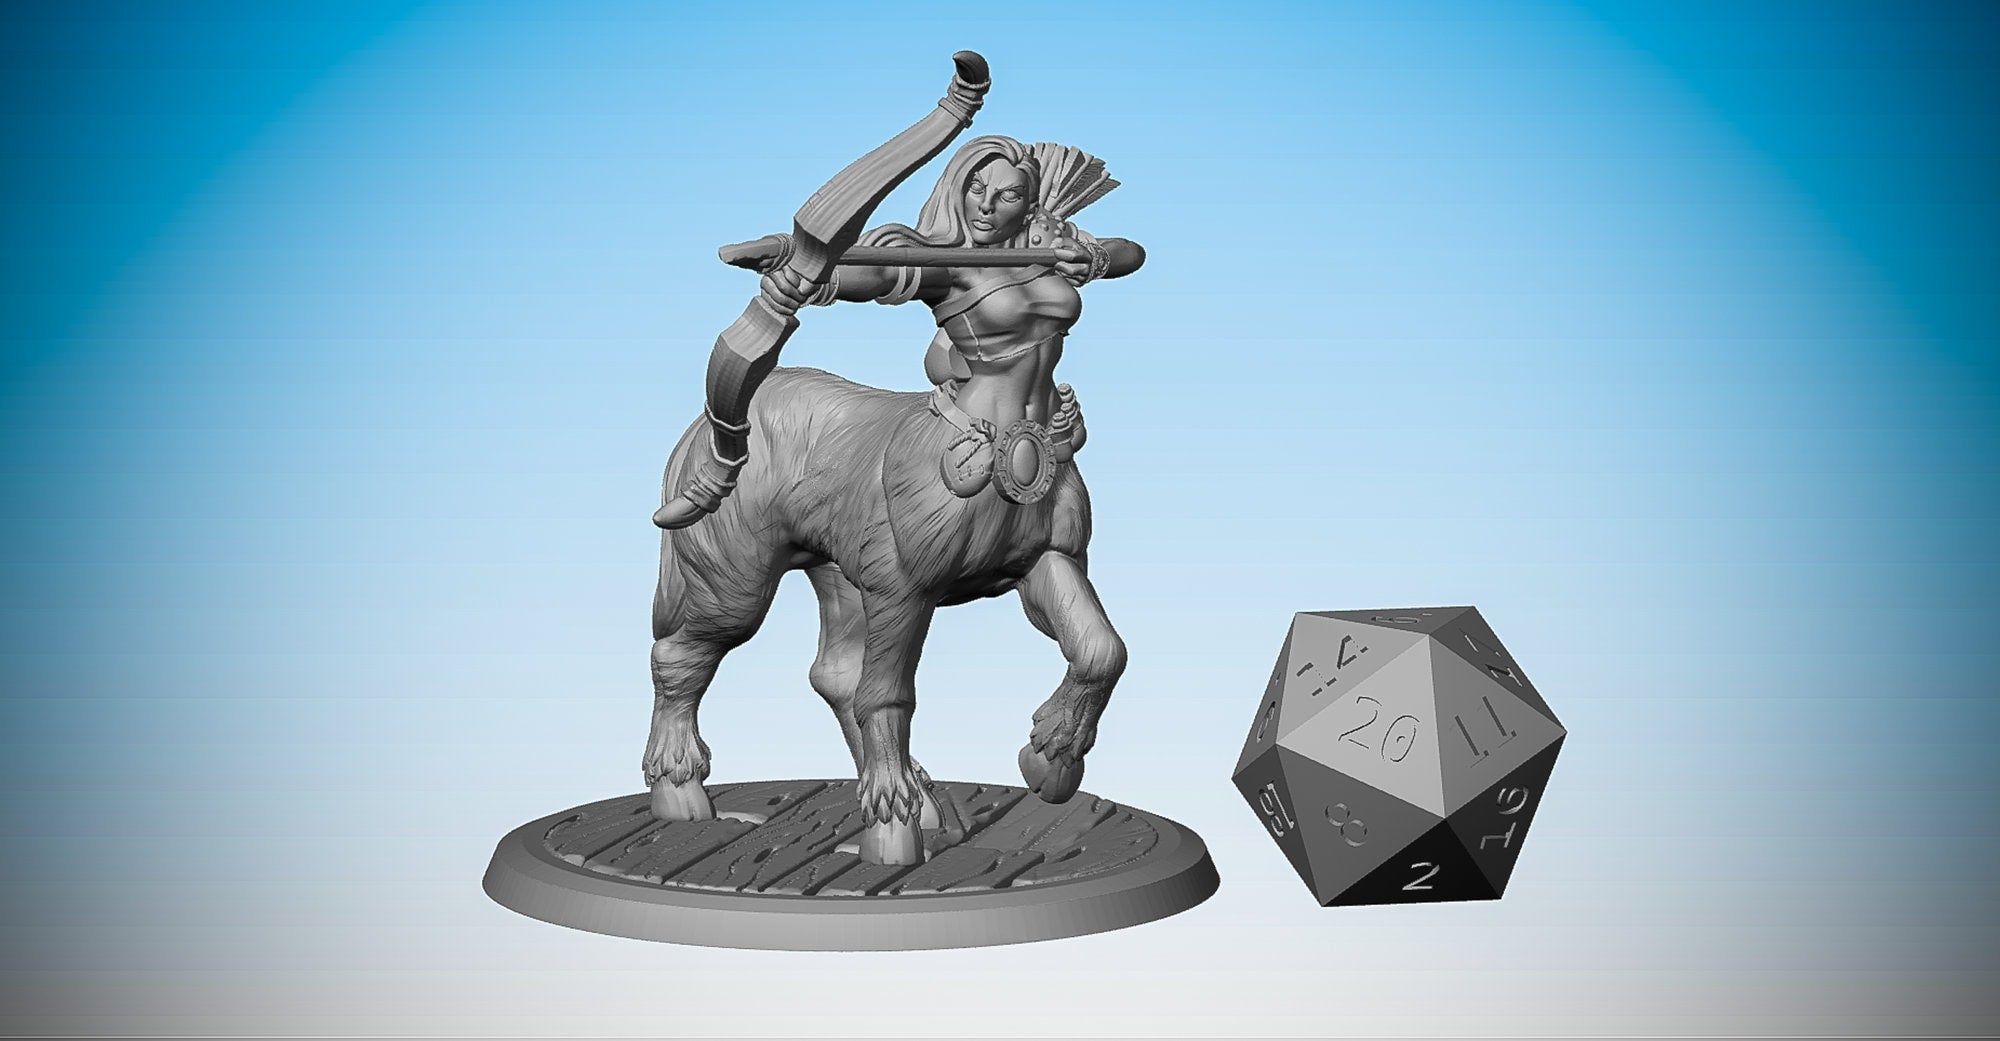 CENTAUR ARCHER Female | 3D Print Mini | Resin | Dungeons and Dragons | Pathfinder | Tabletop | RPG | Hero Size | 28 mm-Role Playing Miniatures